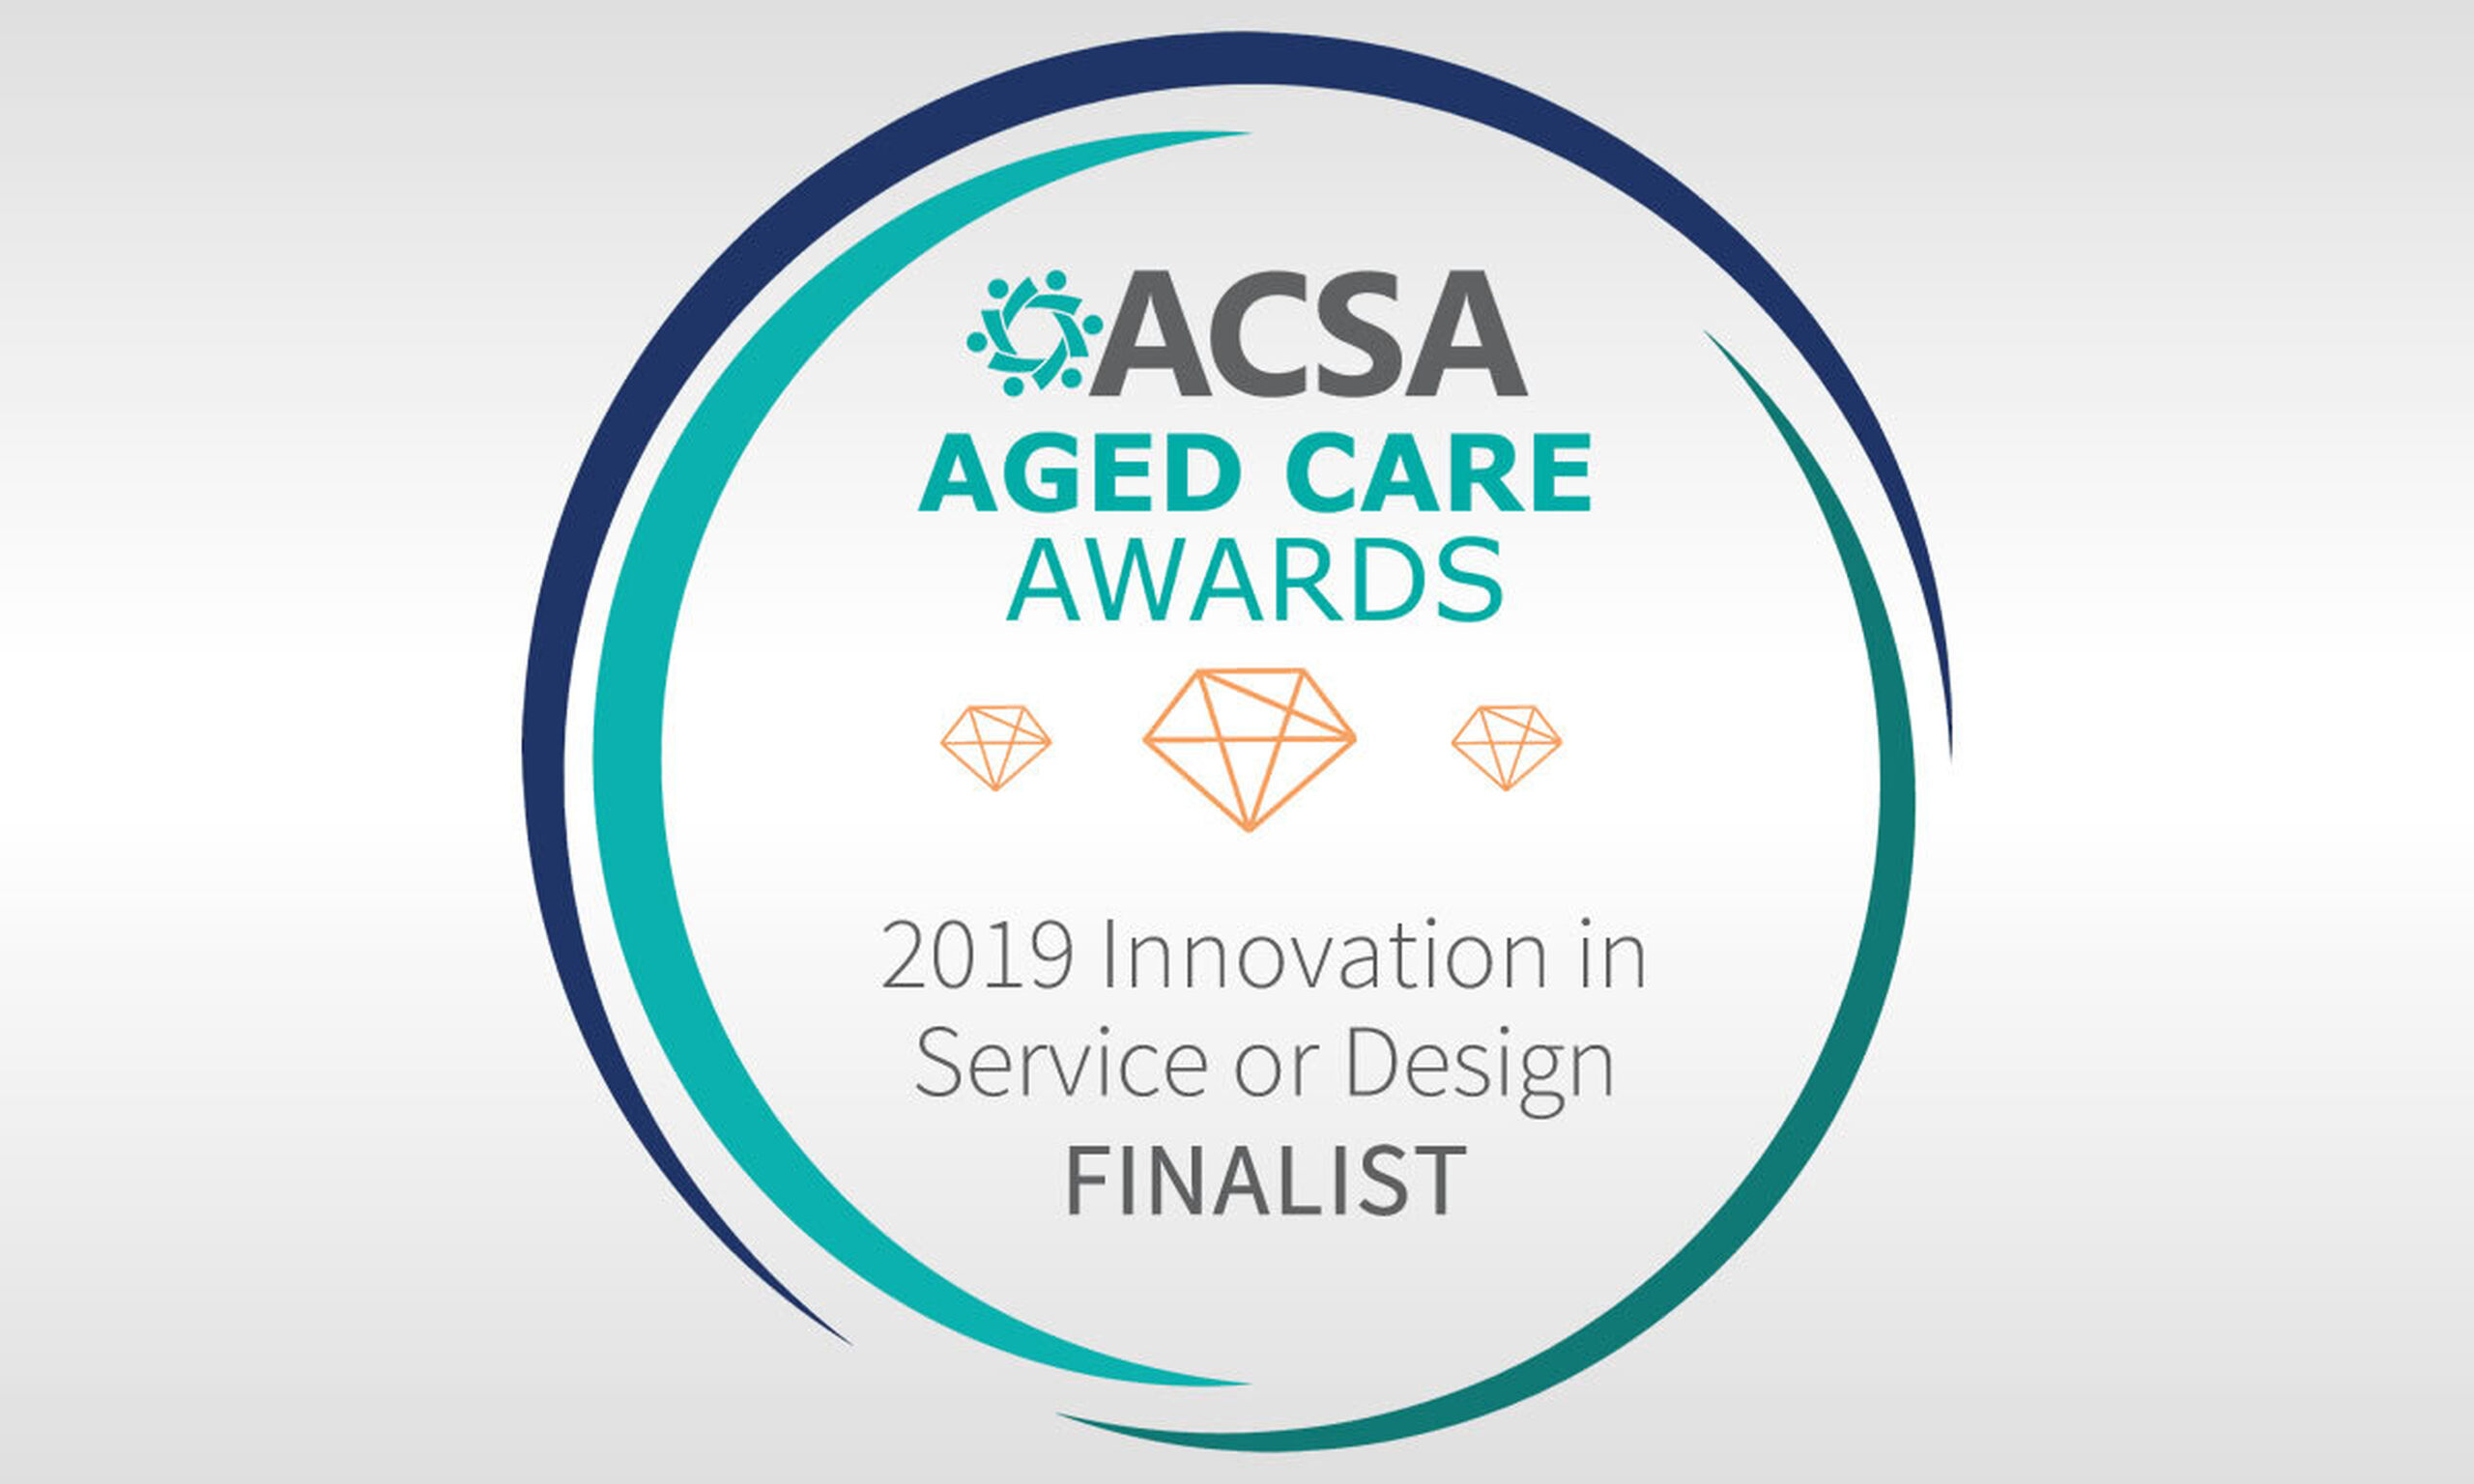 Baptistcare announced as a finalist in the ACSA Aged Care Awards